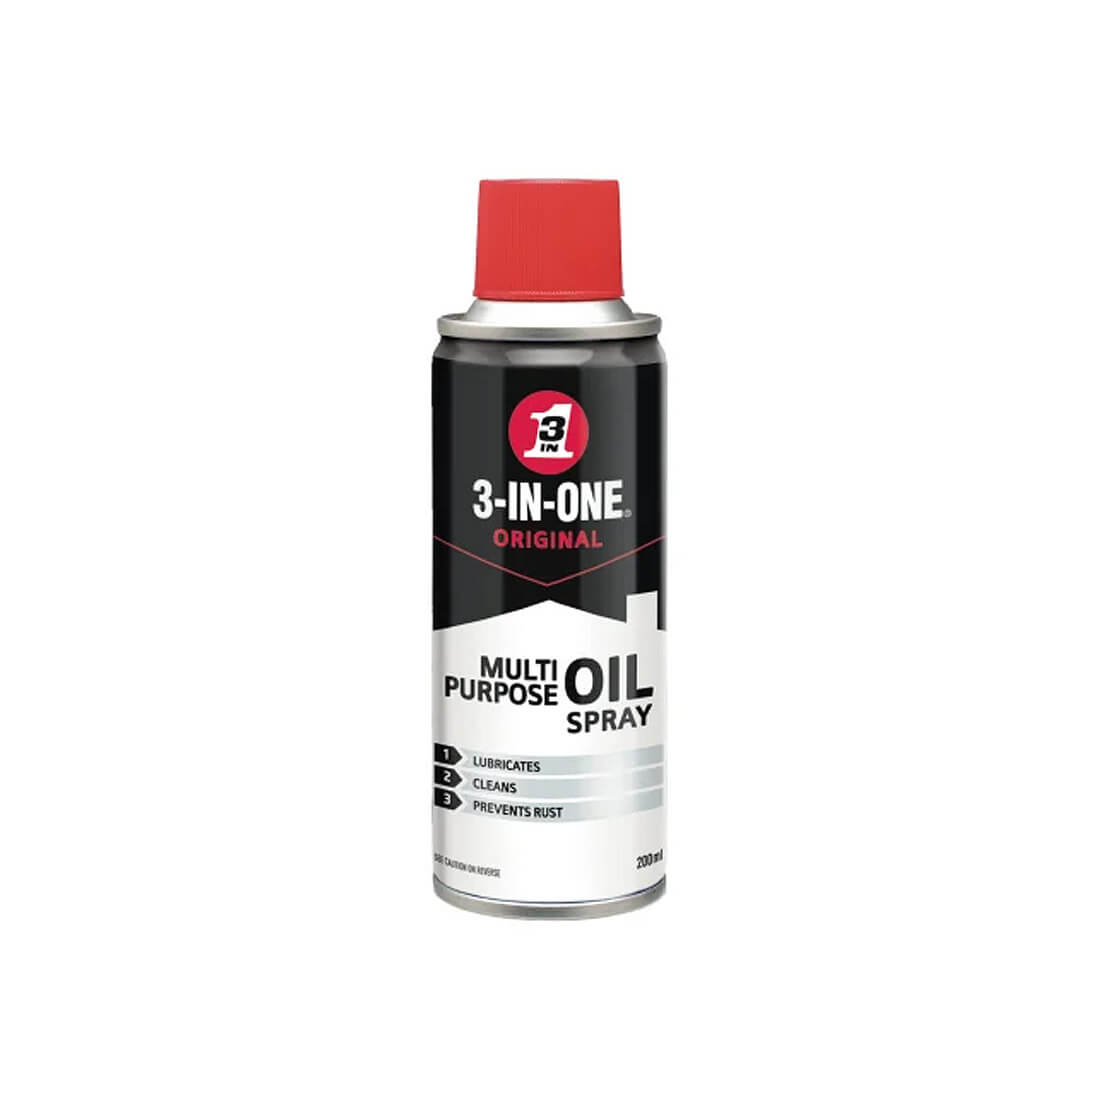 Spray can of 3-IN-ONE Oil Aerosol Can 200ml, lubricates, cleans and prevents rust